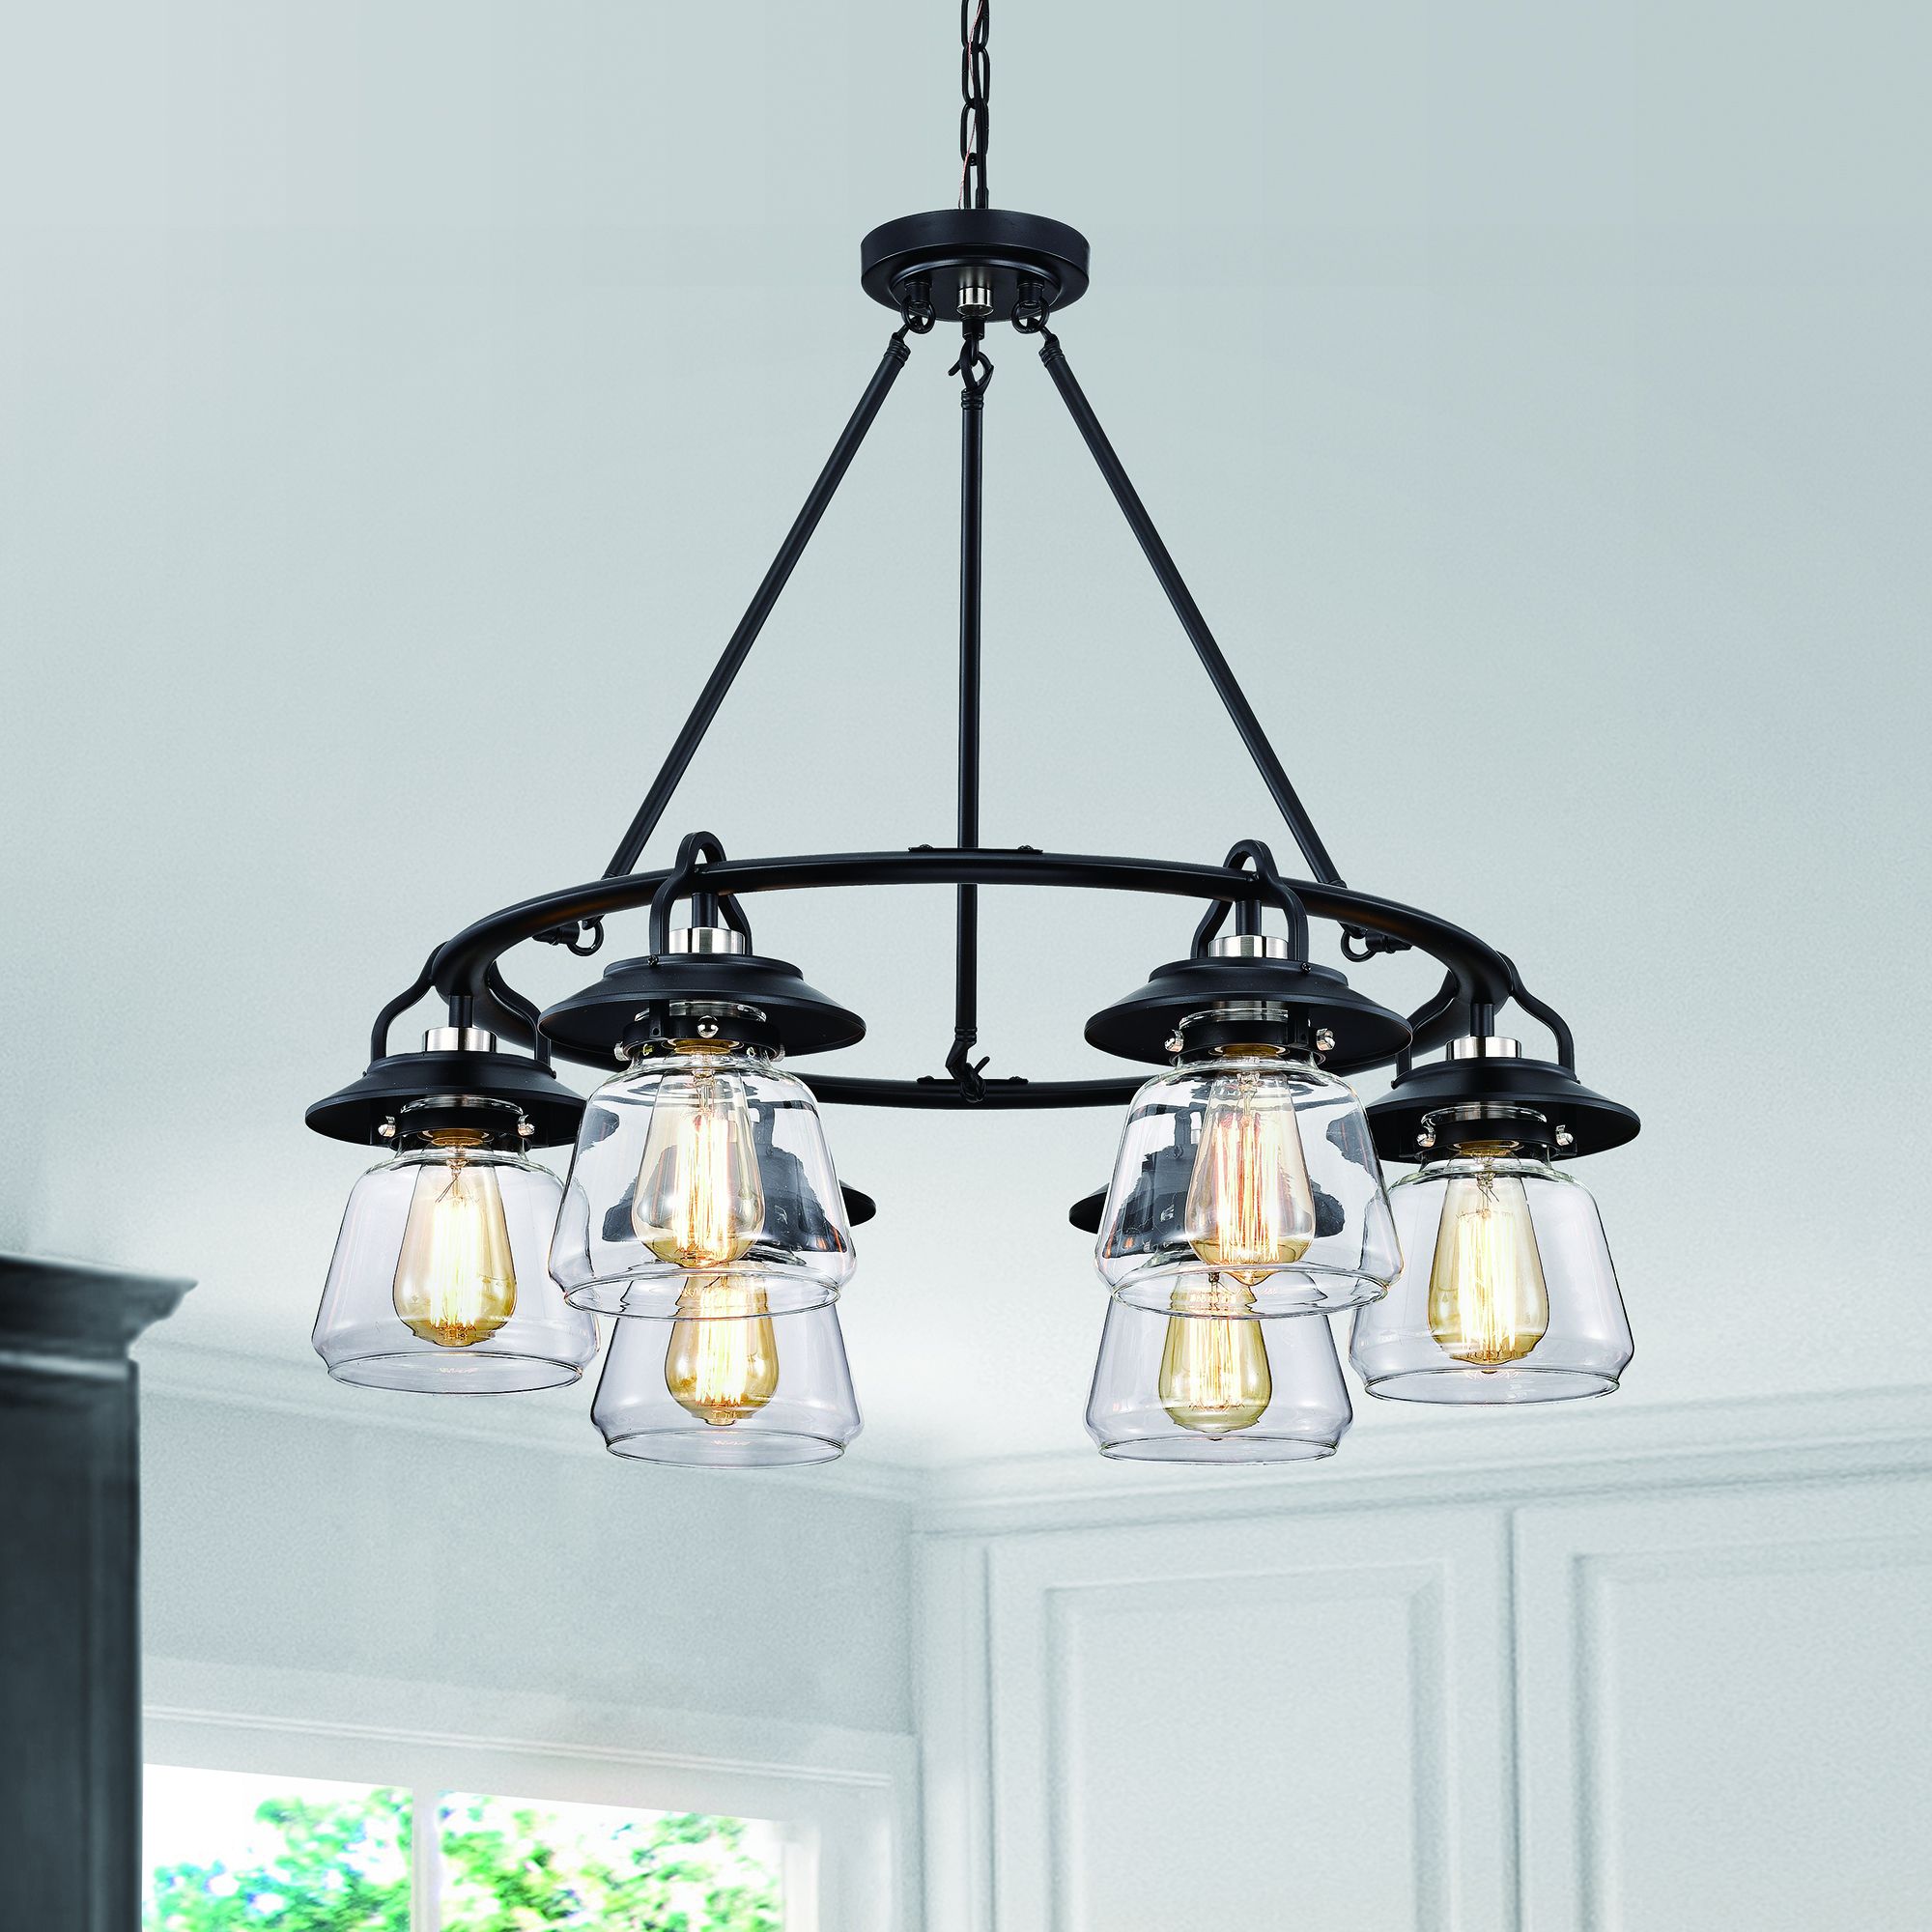 Black Wagon Wheel Ring Chandeliers Within Best And Newest 6 Light Antique Black Wagon Wheel Chandelier – Edvivi Lighting (View 8 of 15)